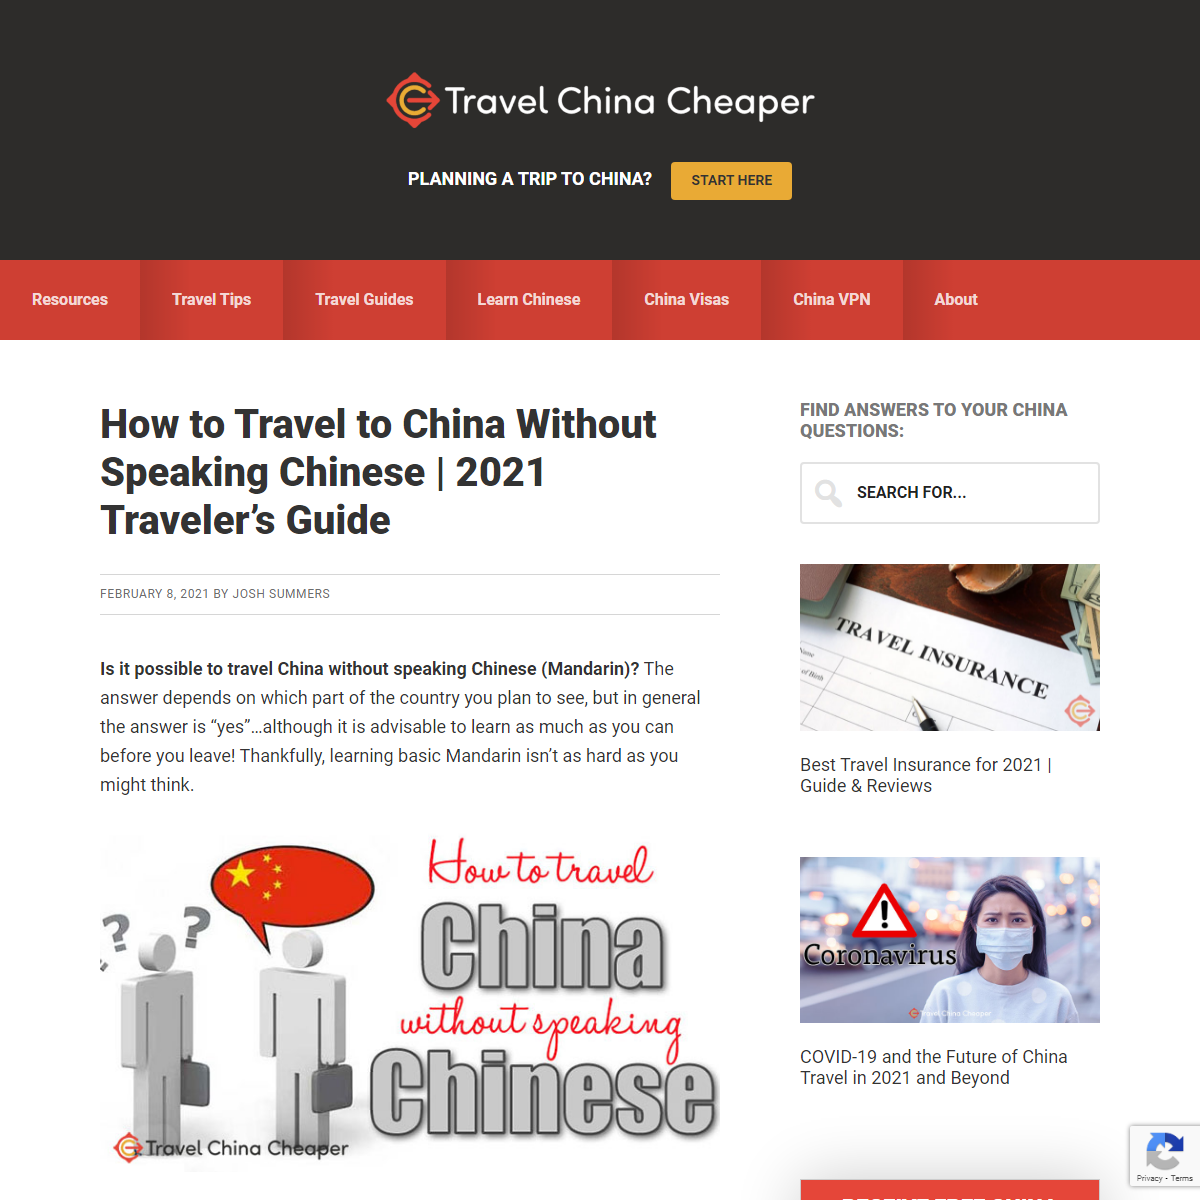 How to Travel to China Without Speaking Chinese - 2021 Traveler`s Guide